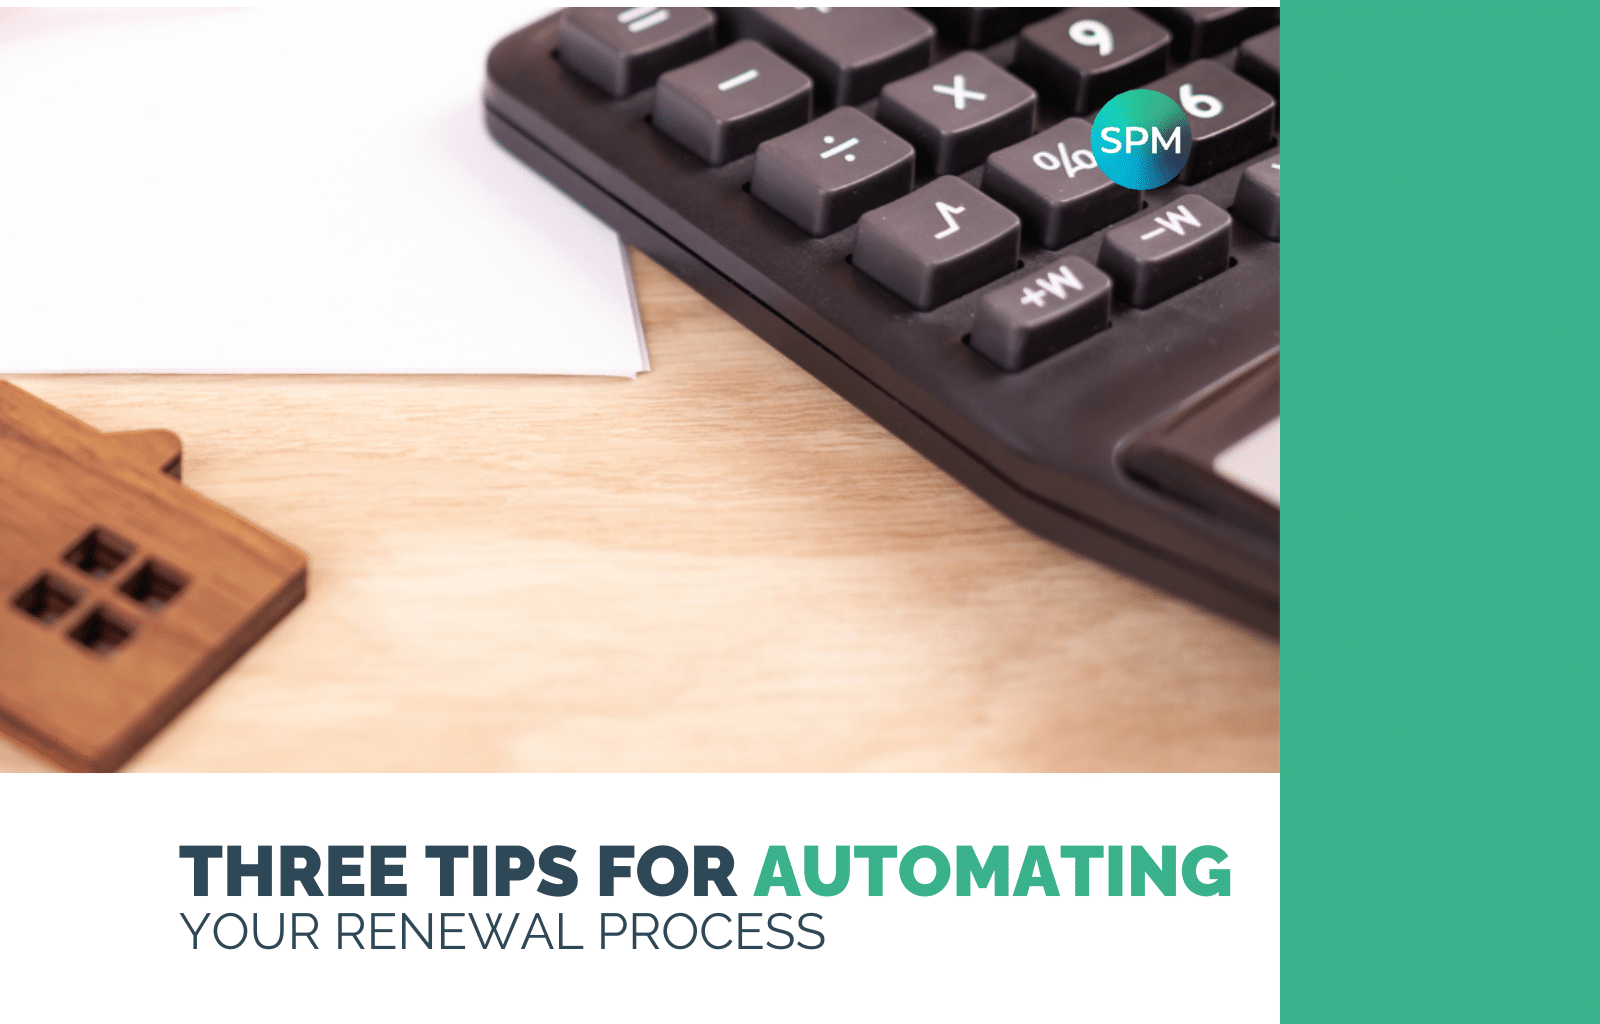 Three tips for automating your renewal process